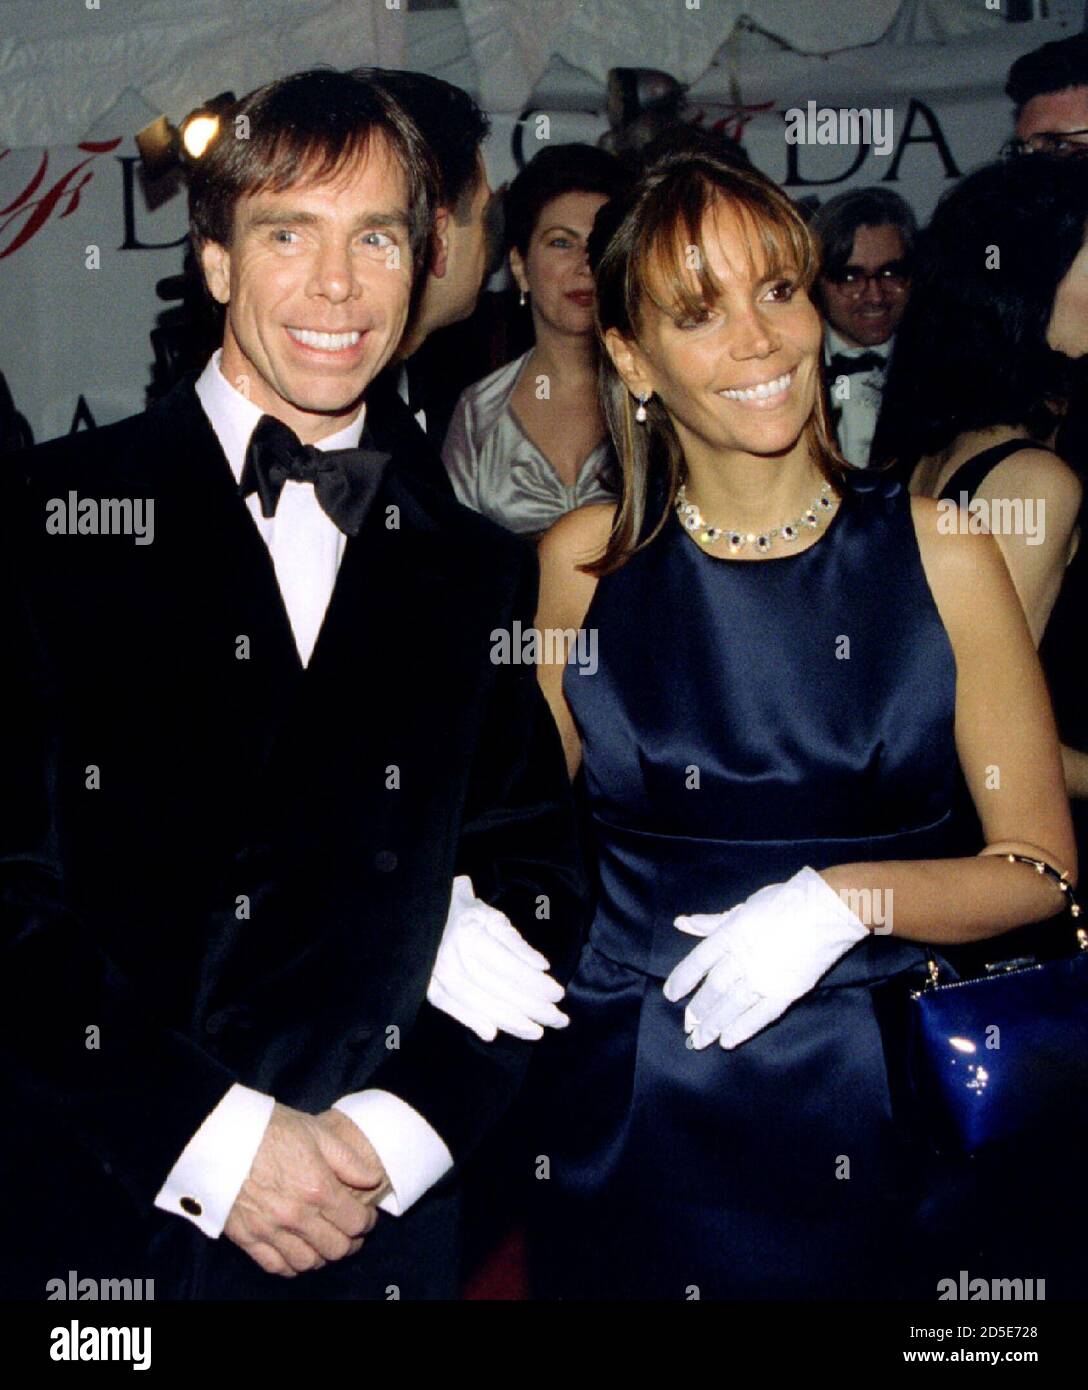 Fashion designer Tommy Hilfiger and his wife Susan arrive at the Council of  Fashion Designers of America awards, February 12 in New York. Hilfiger was  named designer of the year for menswear